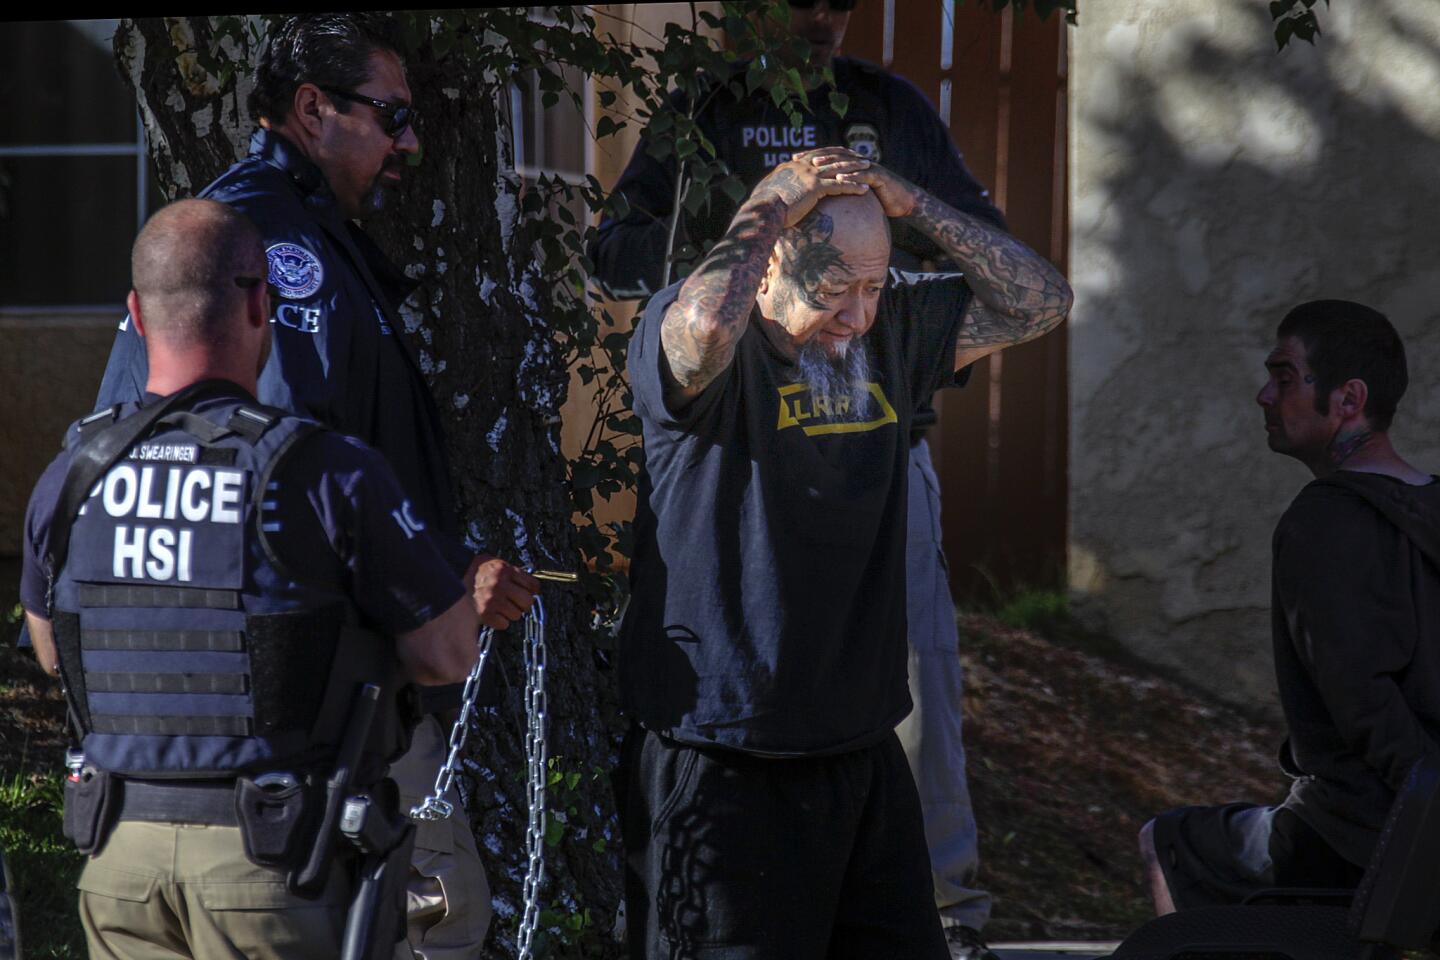 Federal agents Friday arrest a person with Vagos motorcycle gang tattoos in California as part of a sweeping operation targeting the biker gang.